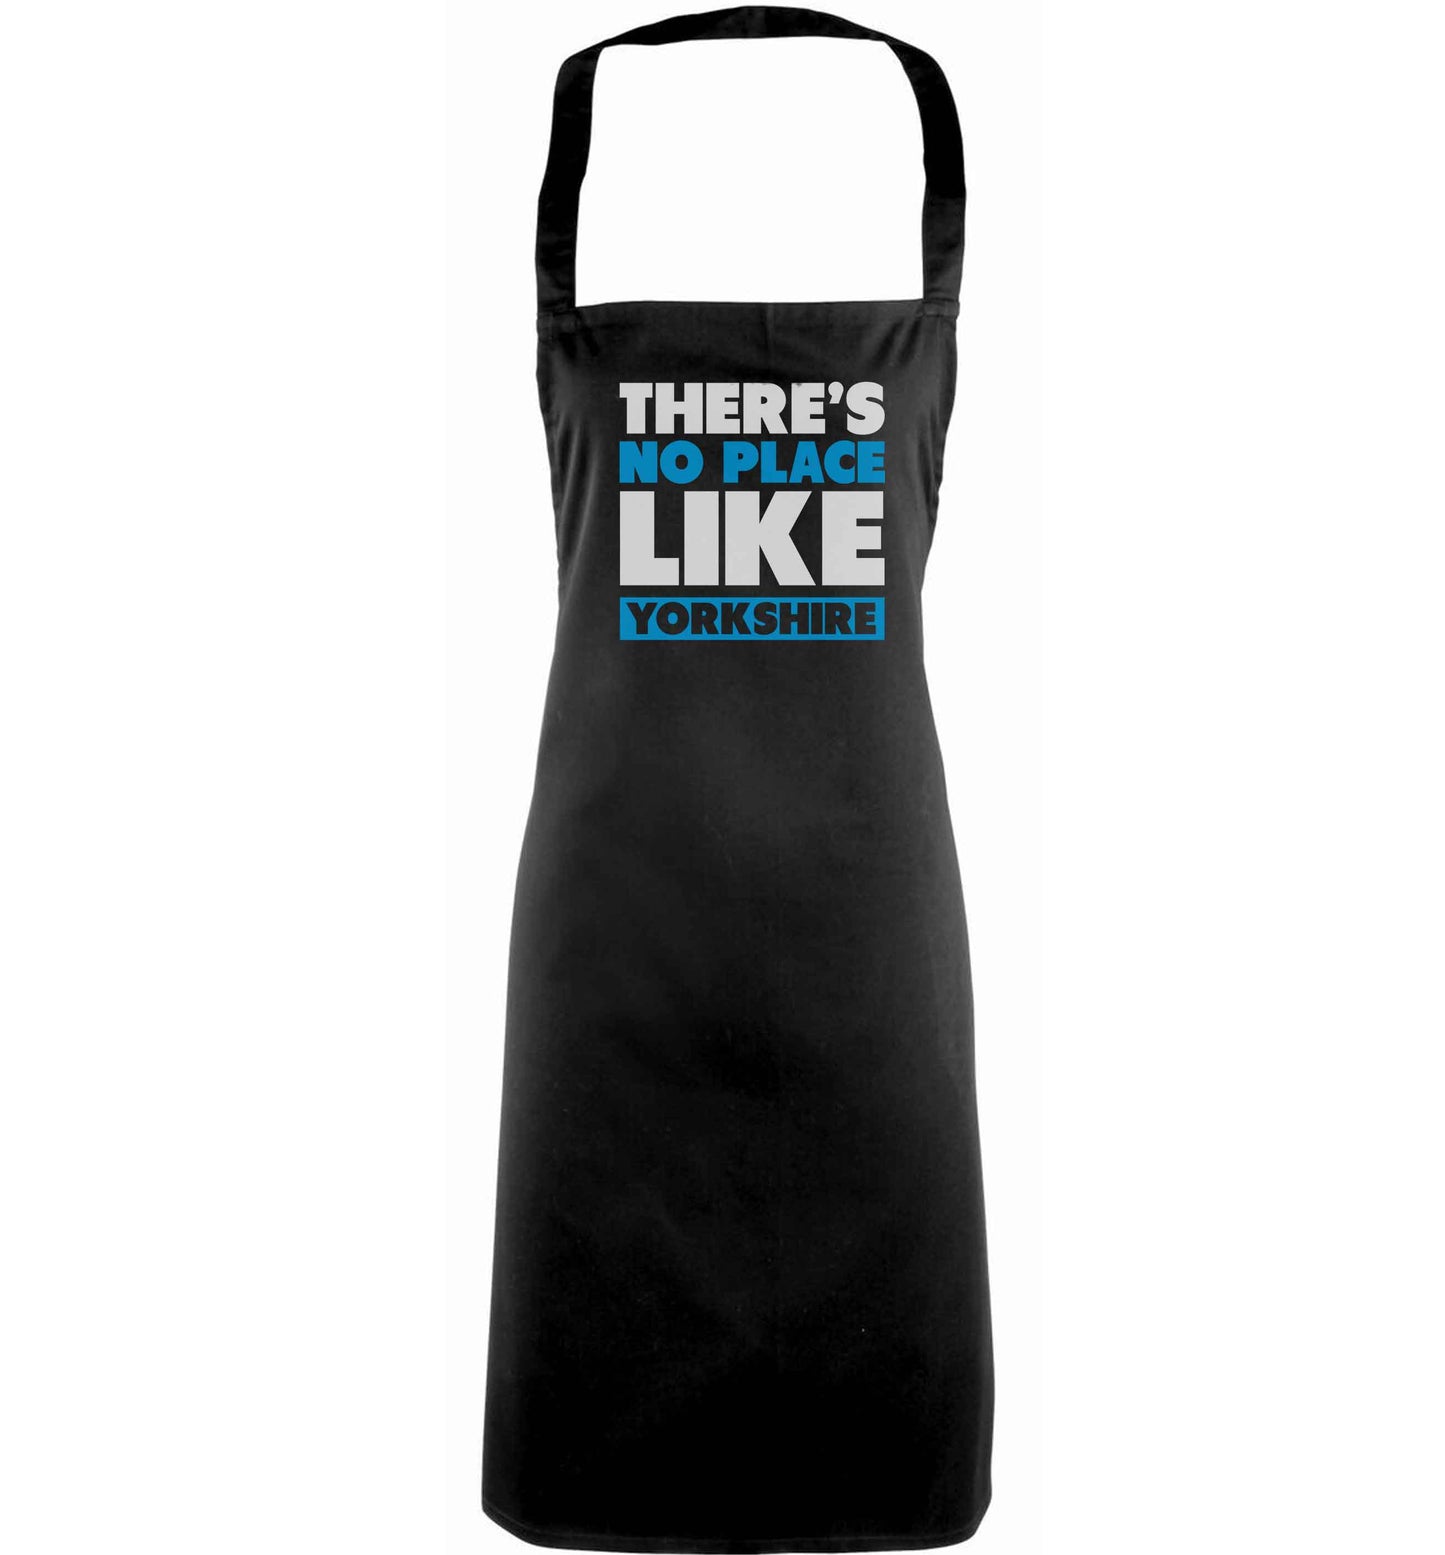 There's no place like Yorkshire adults black apron